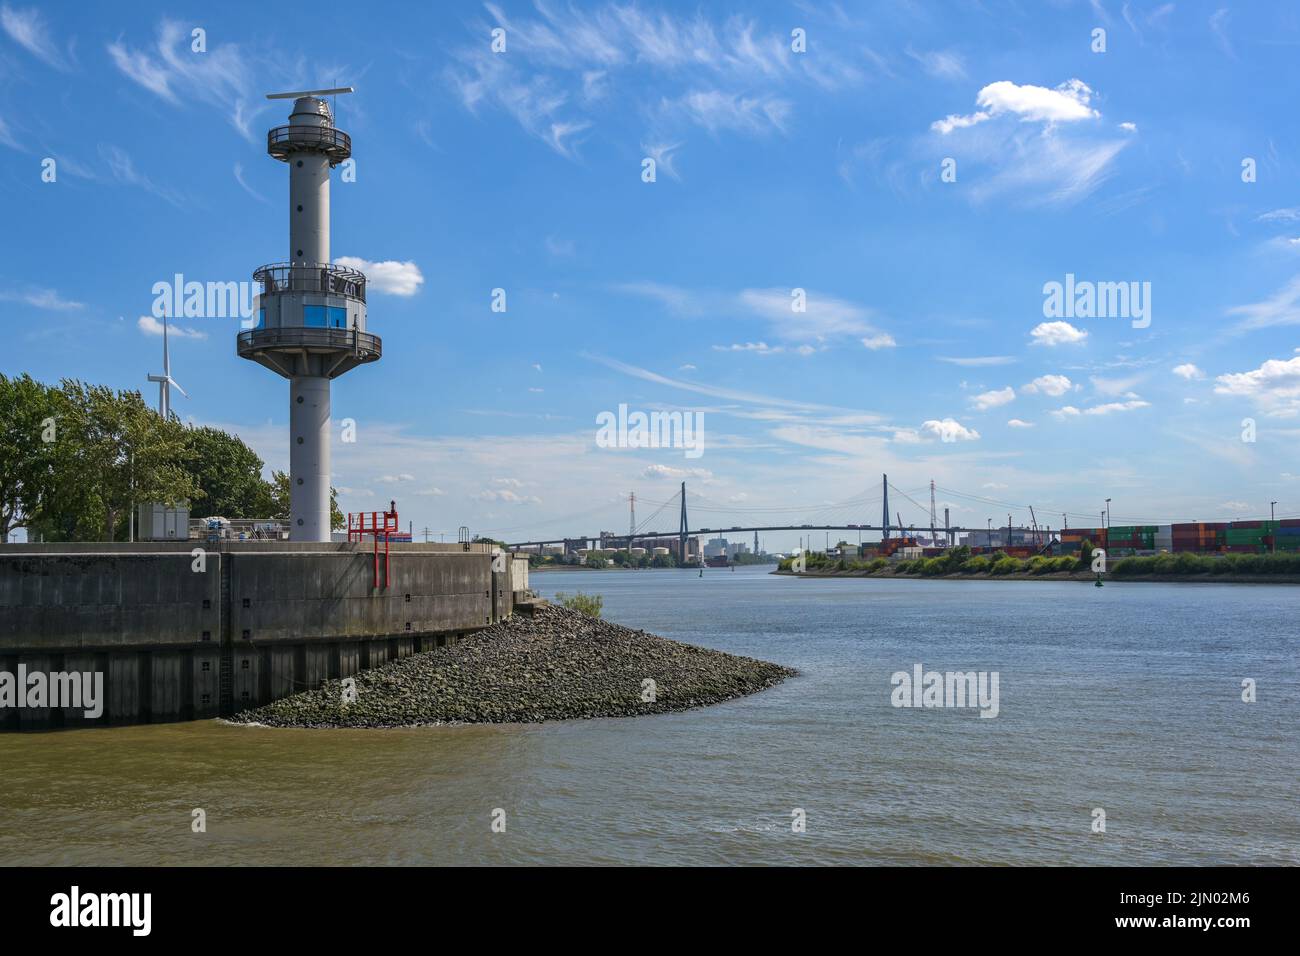 Radar tower with water level indicator at the Steinwerder coal ship harbor in the cargo port of Hamburg, Koehlbrand Bridge over the river Elbe in the Stock Photo